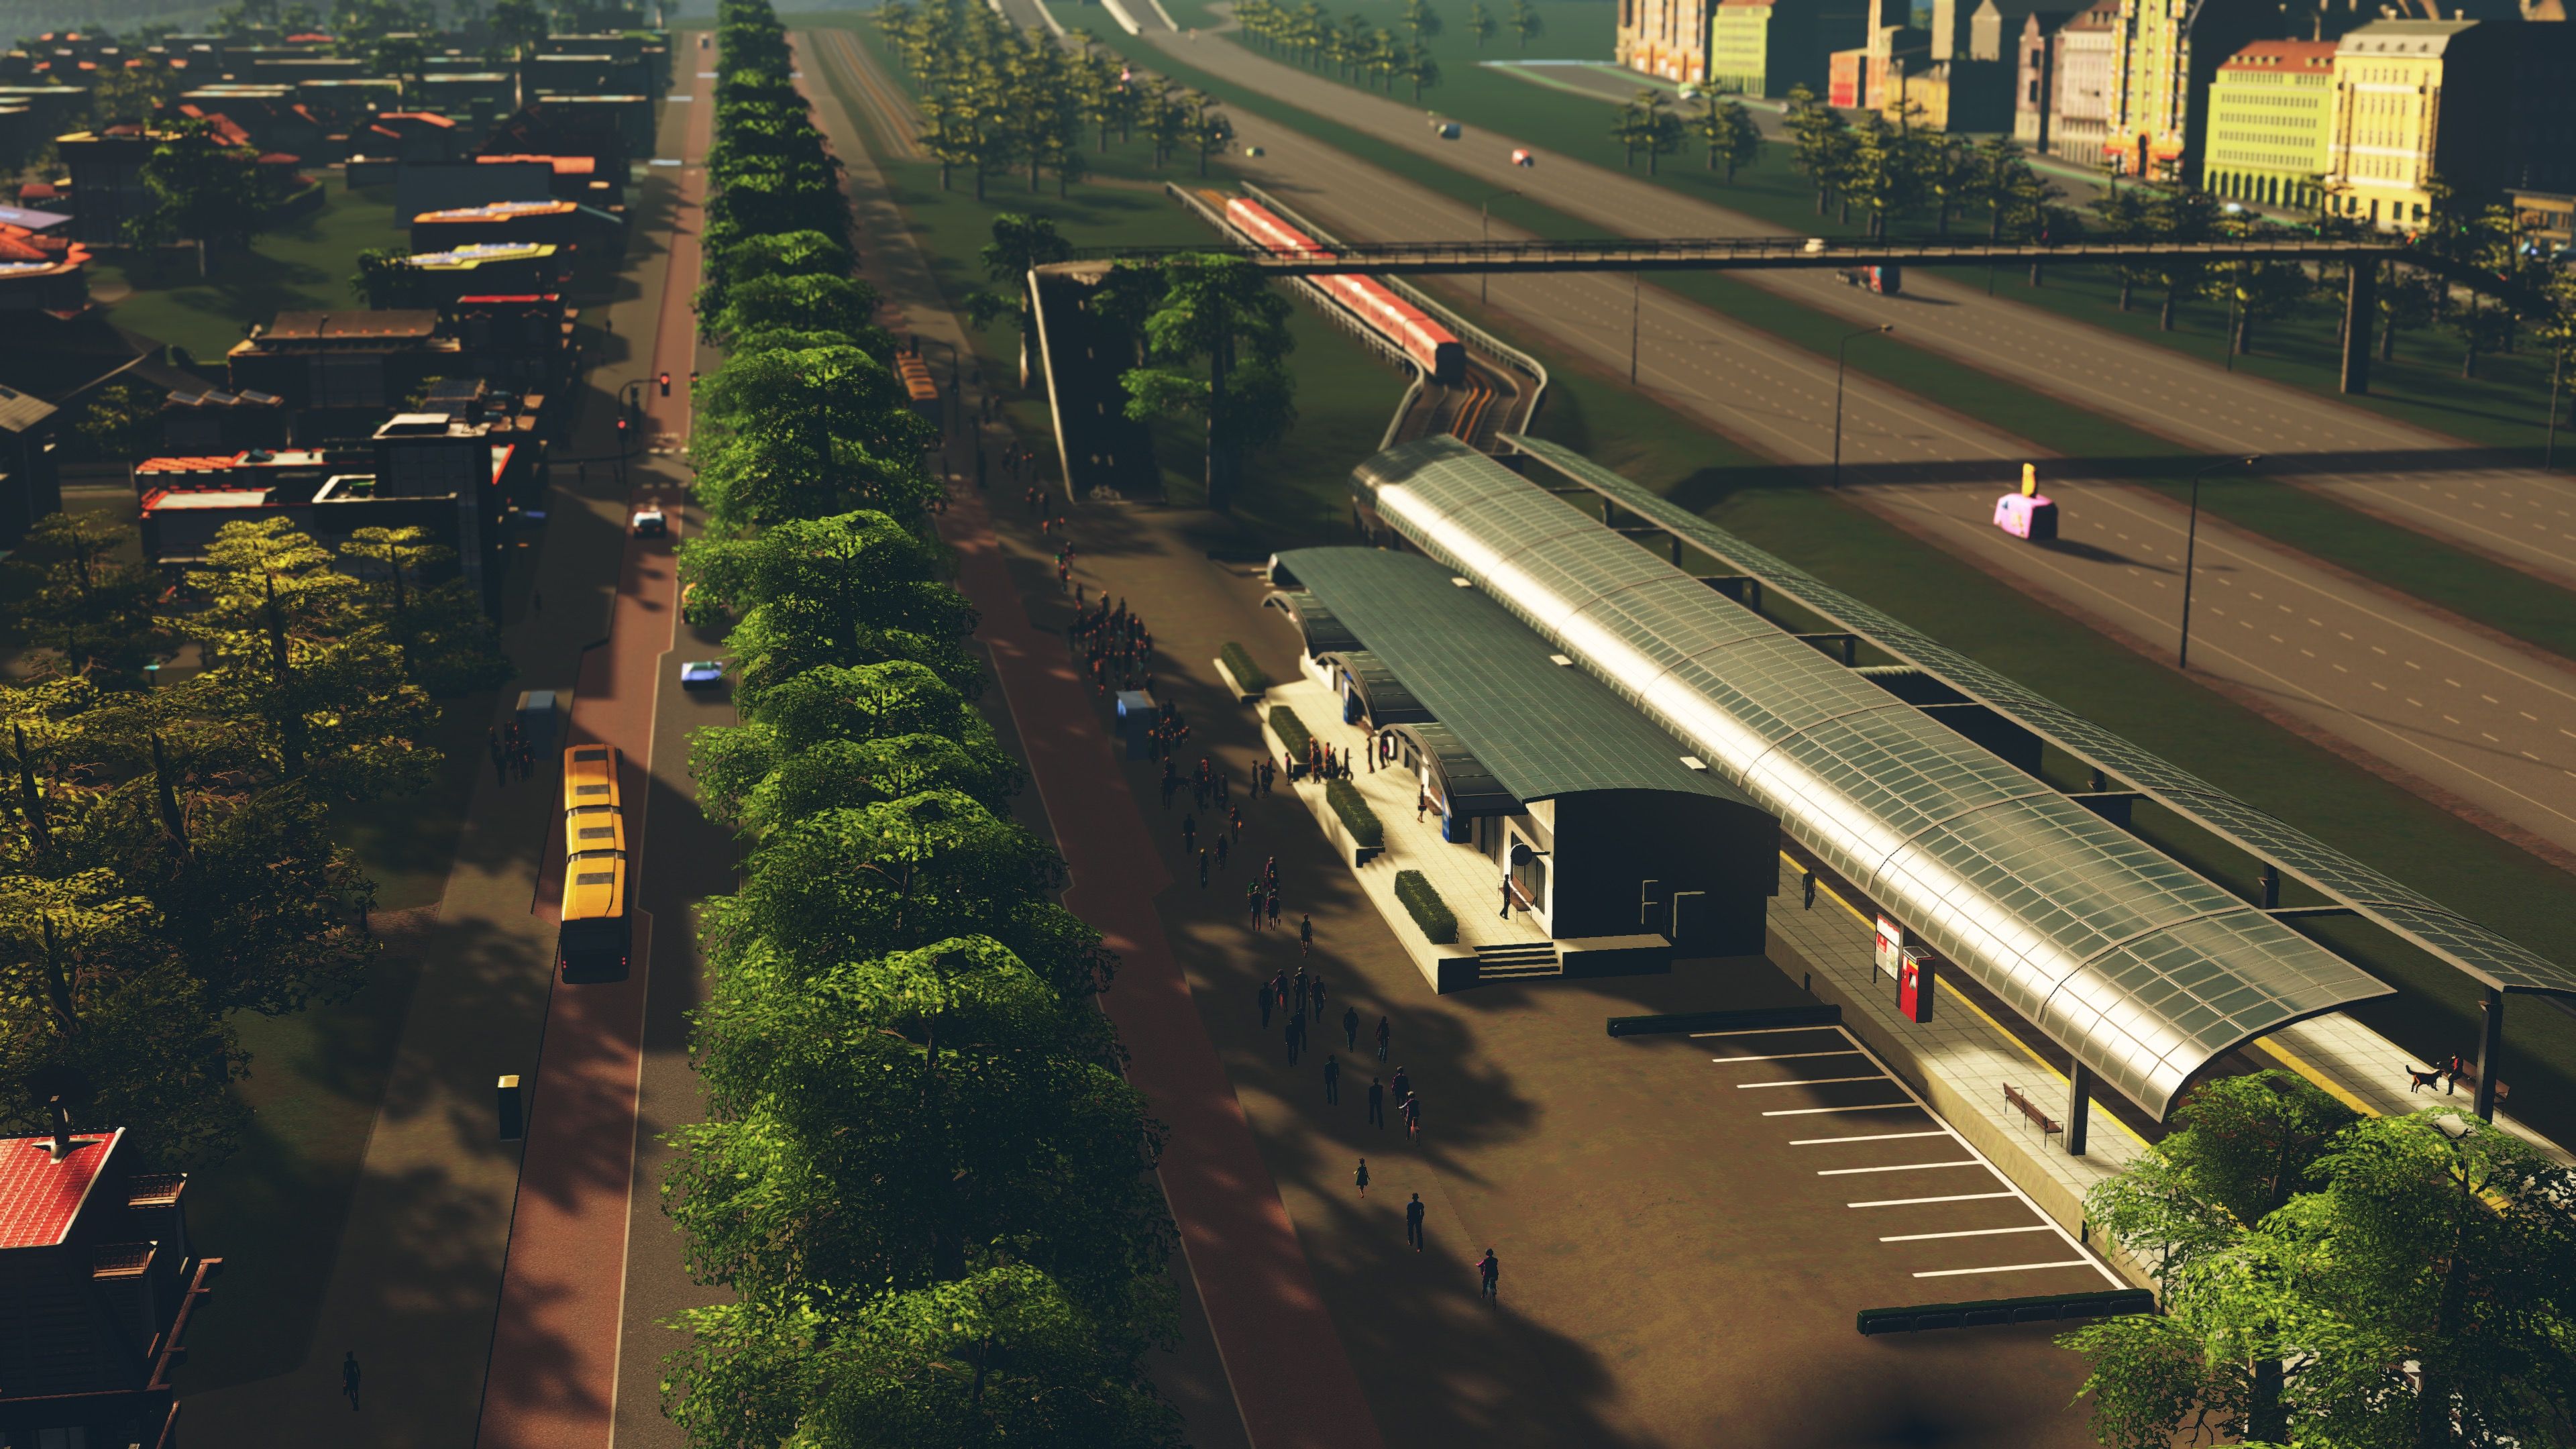 A screenshot from Cities: Skylines, looking down a leafy boulevard. The road has two lanes on each side, one regular and one bus lane, and there's a yellow bendy-bus just pulling into a stop at the left. On the right alongside the road is a train station with a whole bunch of people walking down the street and going into the station. On the other side of the train station is a highway, and there's a pedestrian foot bridge crossing over it.